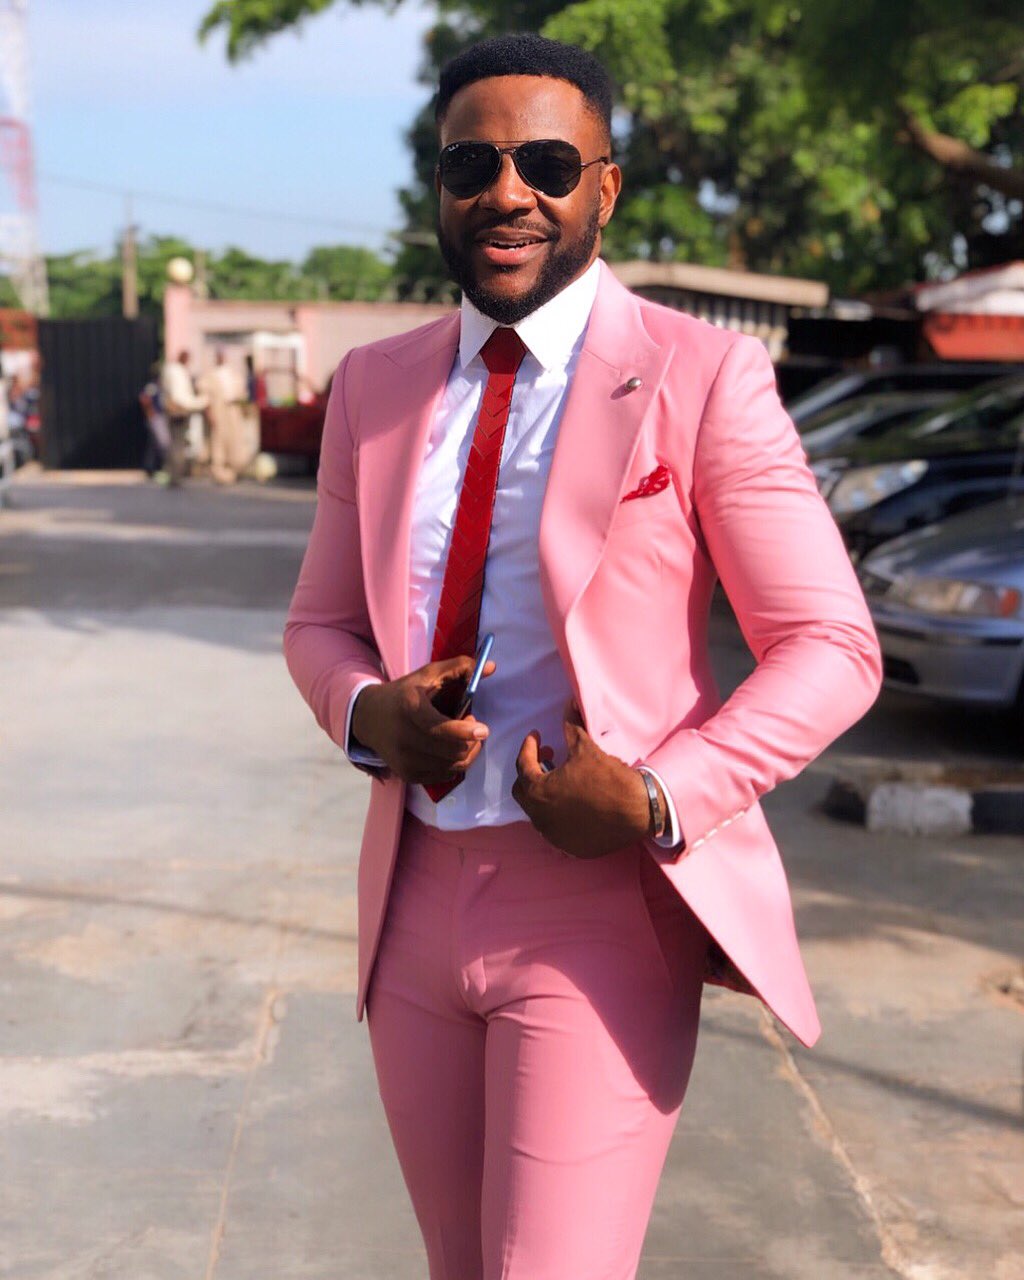 Ebuka Steps Out In Pink Suit! - Celebrities - Nigeria